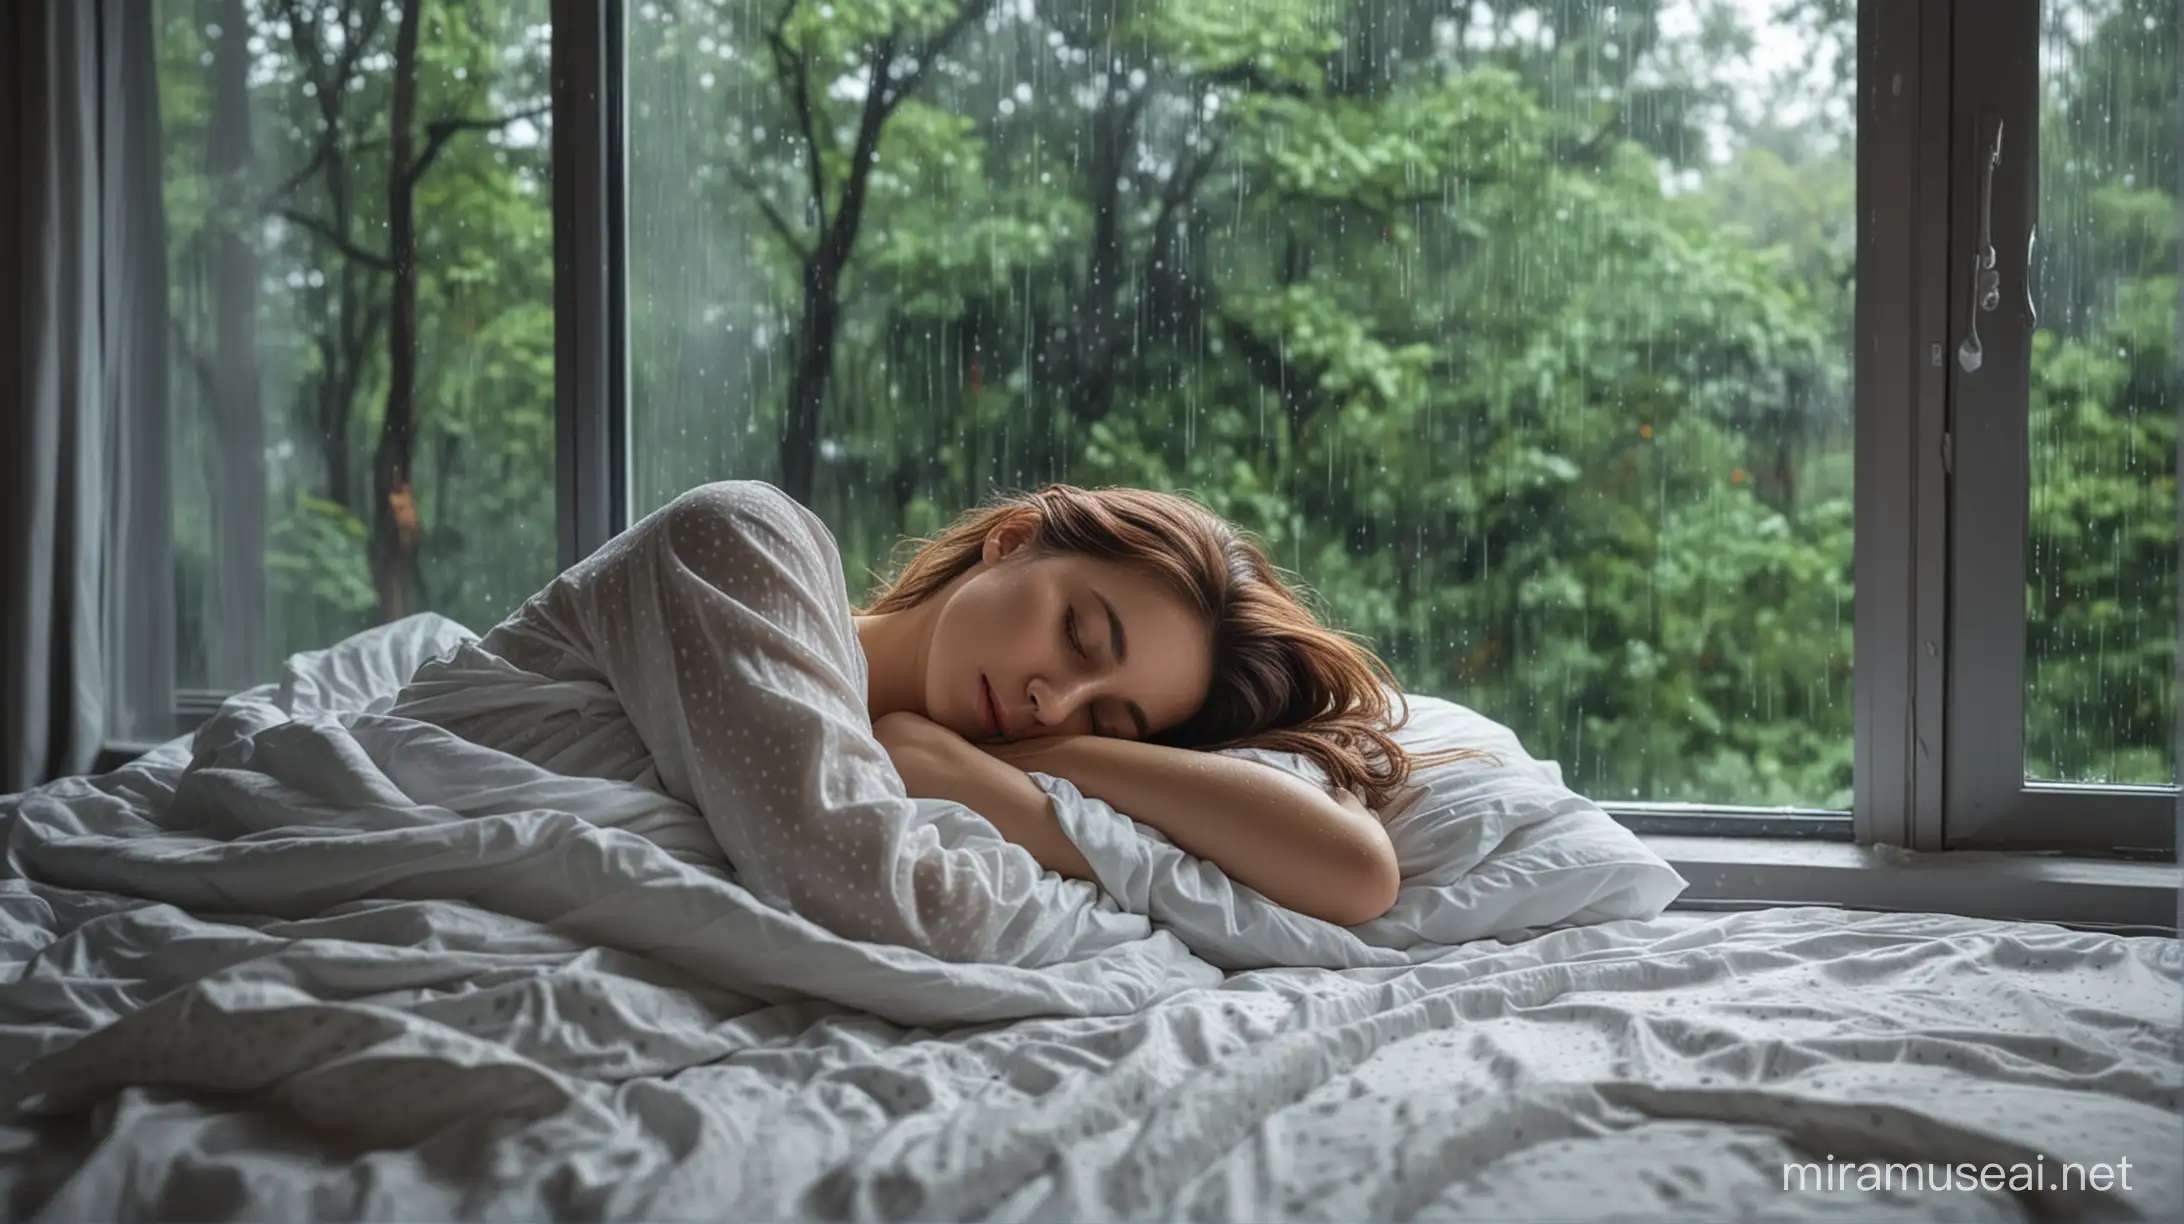 Tranquil Woman Sleeping in Rainy Forest Bedroom